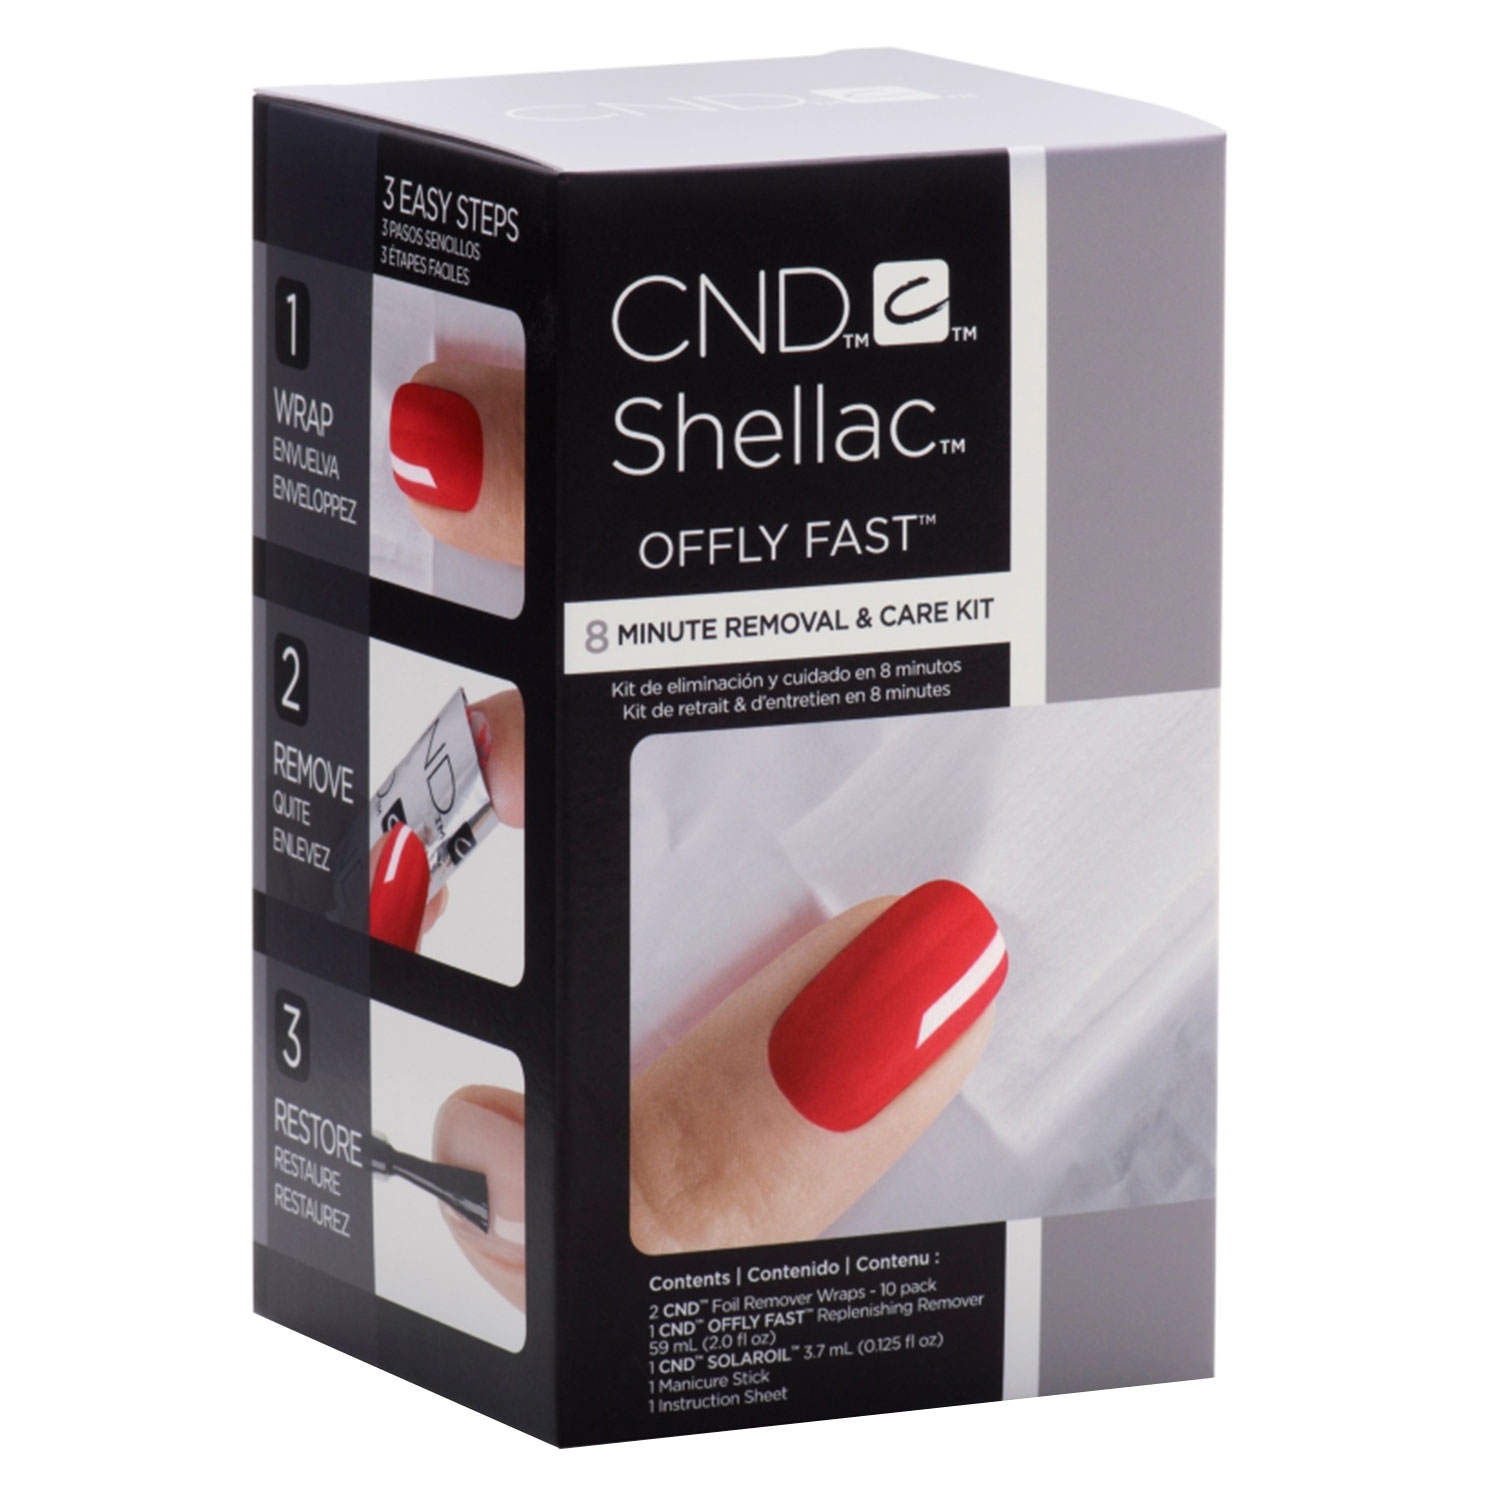 Product image from Shellac - Offly Fast 8 Minute Removal & Care Kit